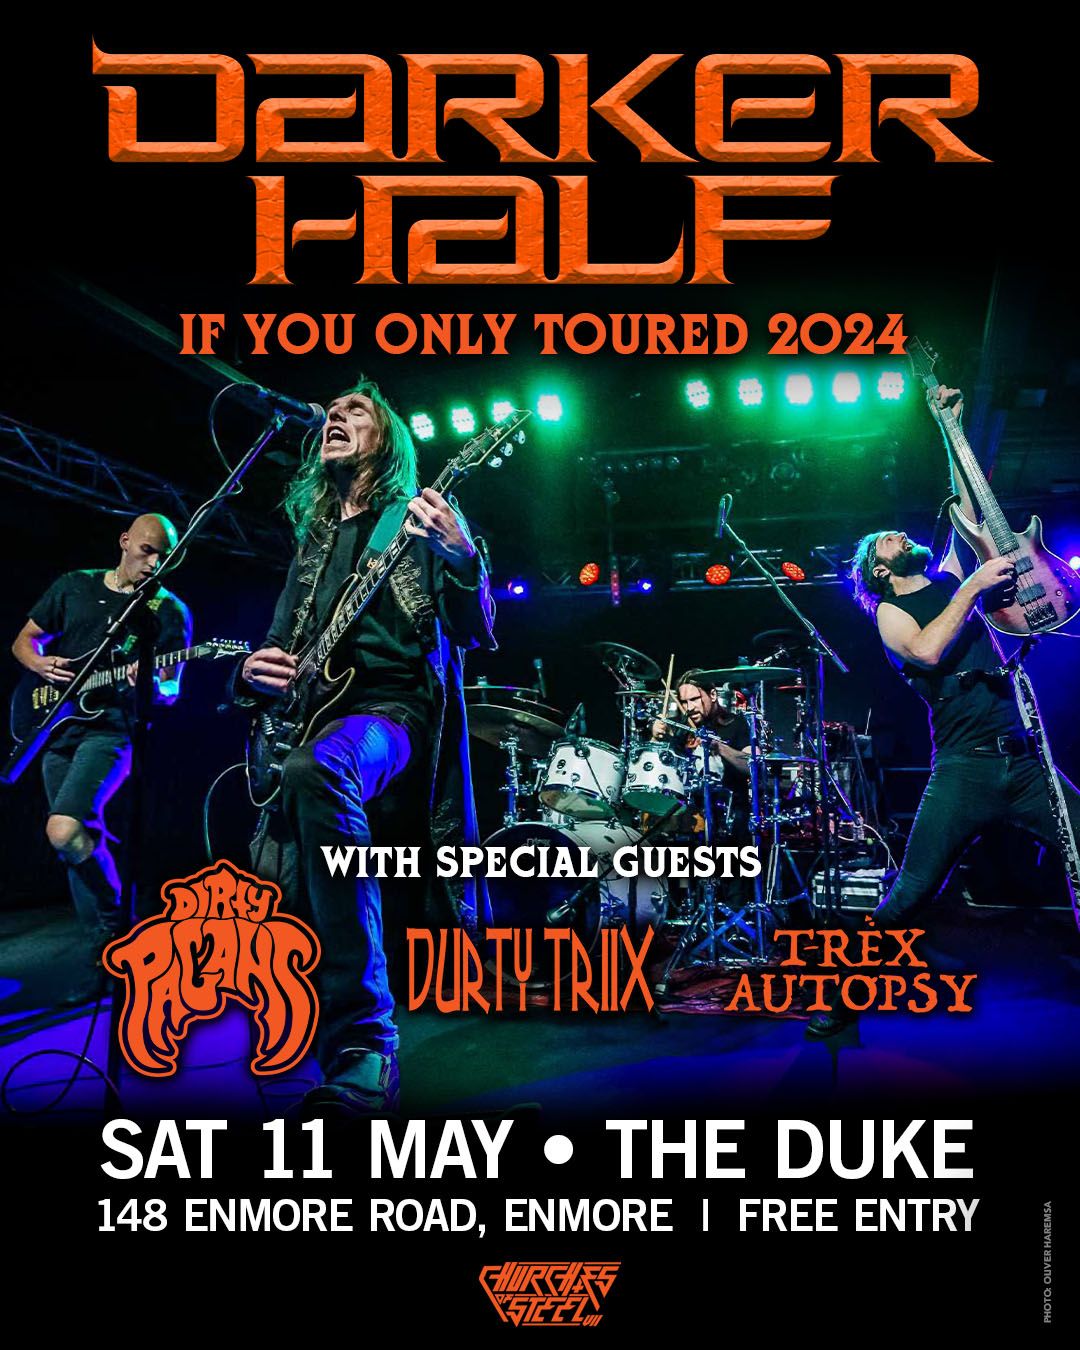 TONIGHT! Darker HaIf - If You Only Toured 2024 w\/ Dirty Pagans + more! Sydney - FREE ENTRY! 